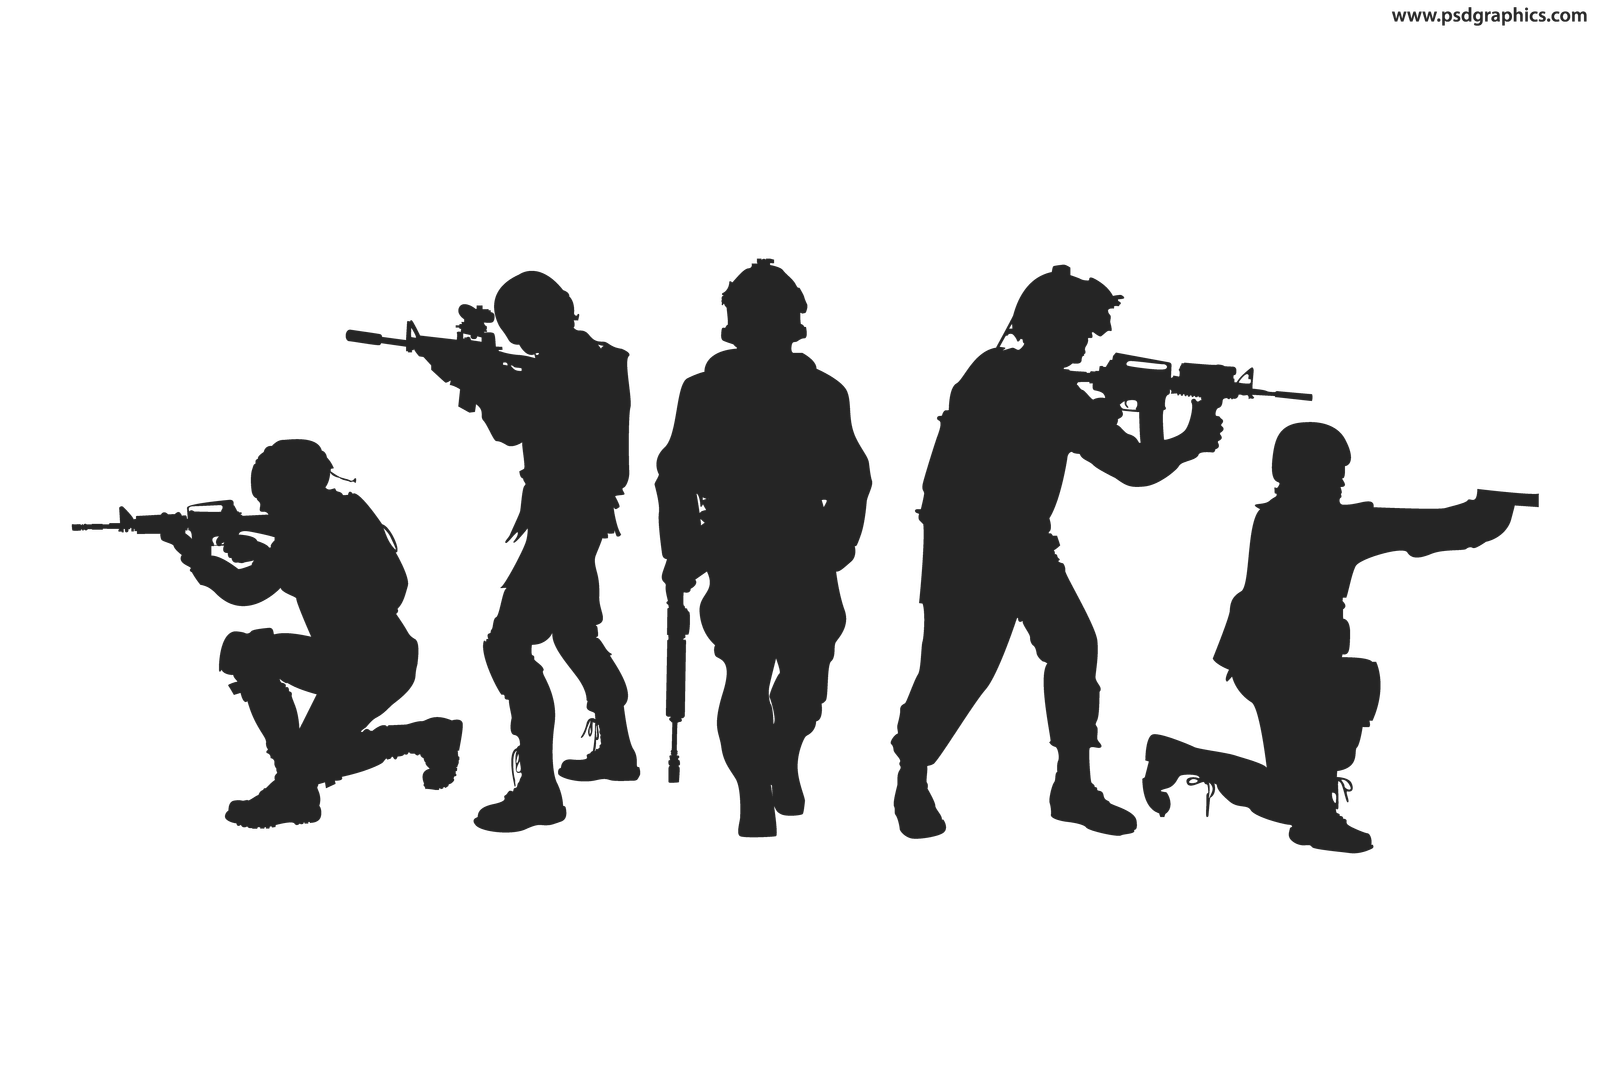 Soldiers silhouettes vector - PSDgraphics